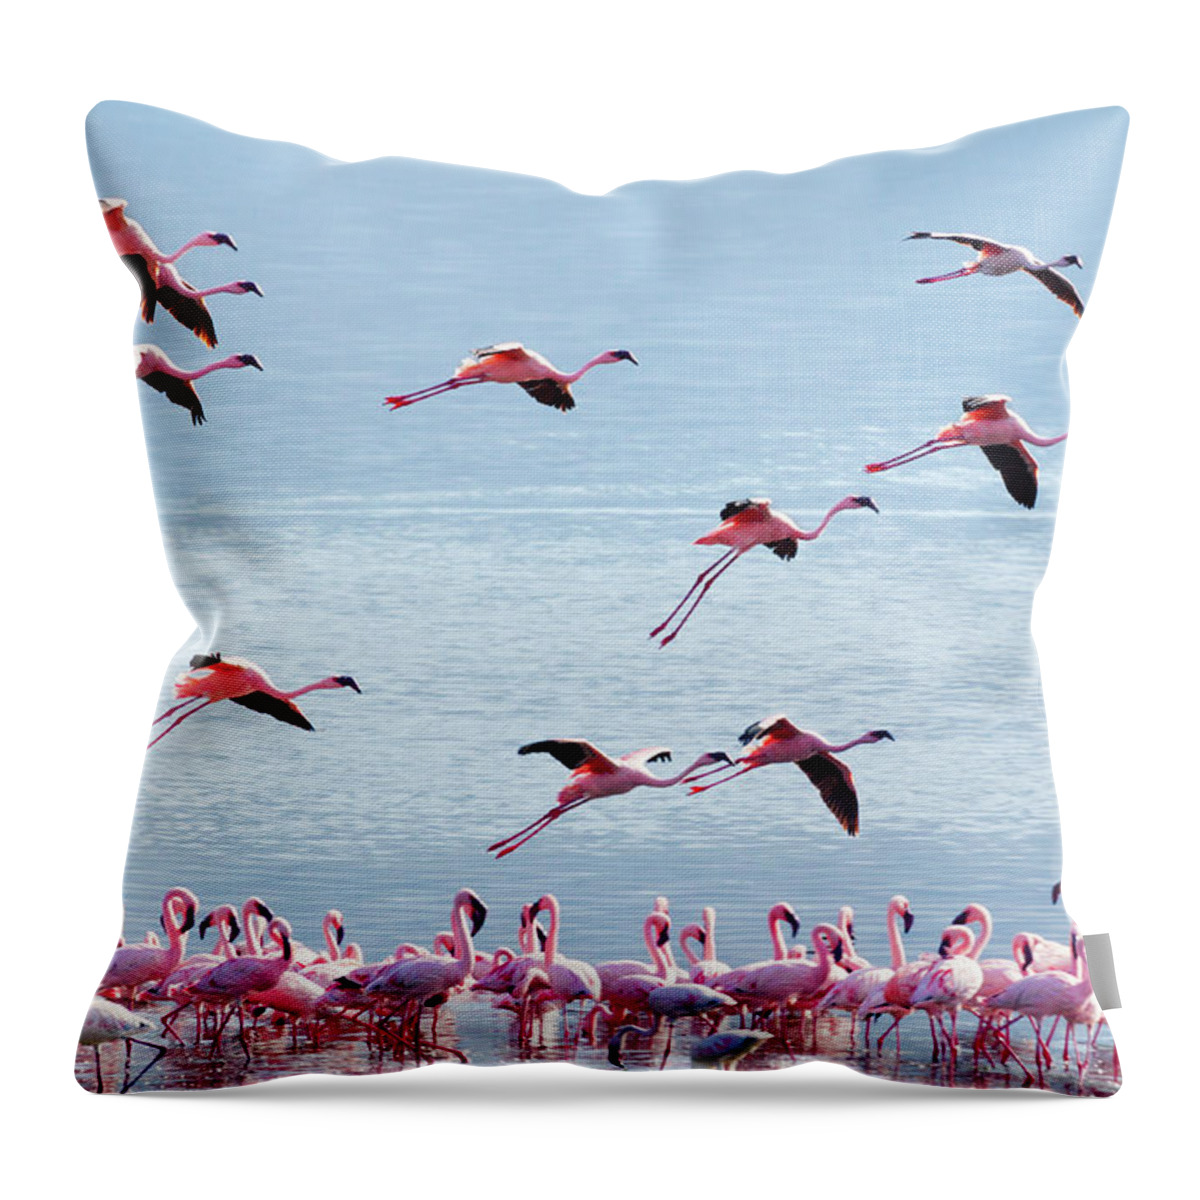 Kenya Throw Pillow featuring the photograph Flying Flamingo #1 by Ivanmateev